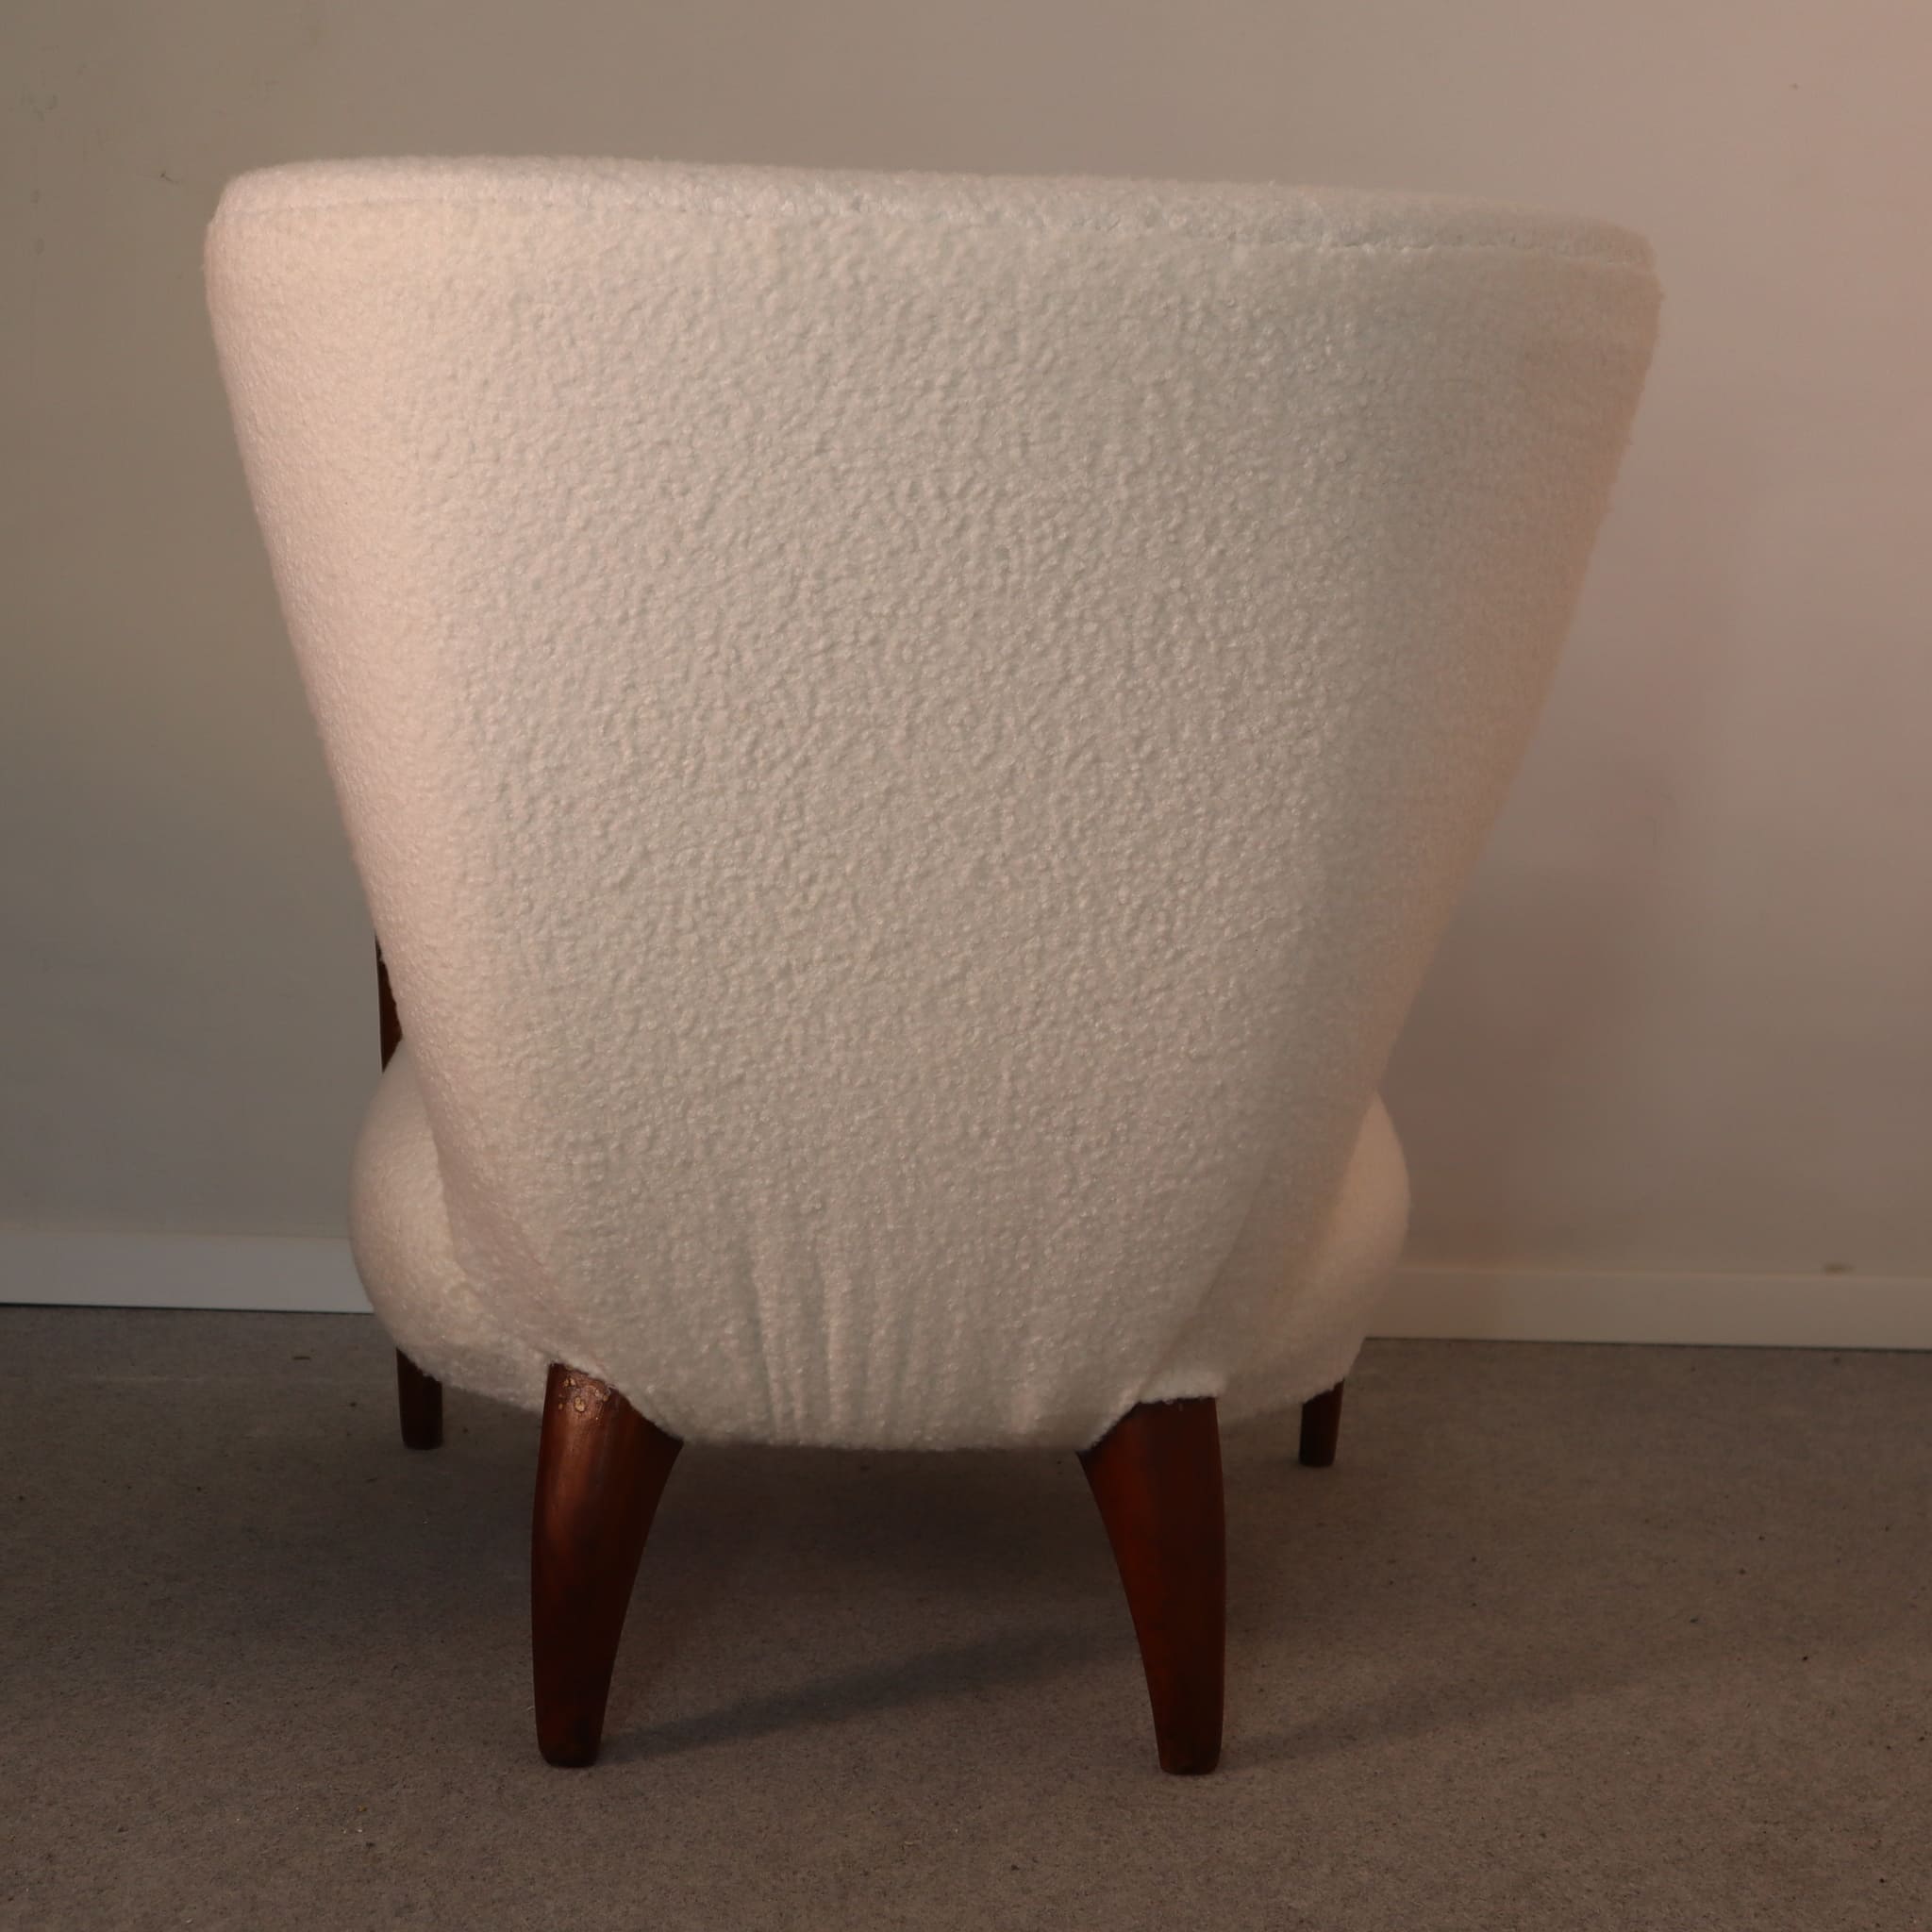 visionidepoca-modern-antique-armchair-40s-white-boucle-fabric-cherry-wood-structure-vintage-armchair-complete-backrest